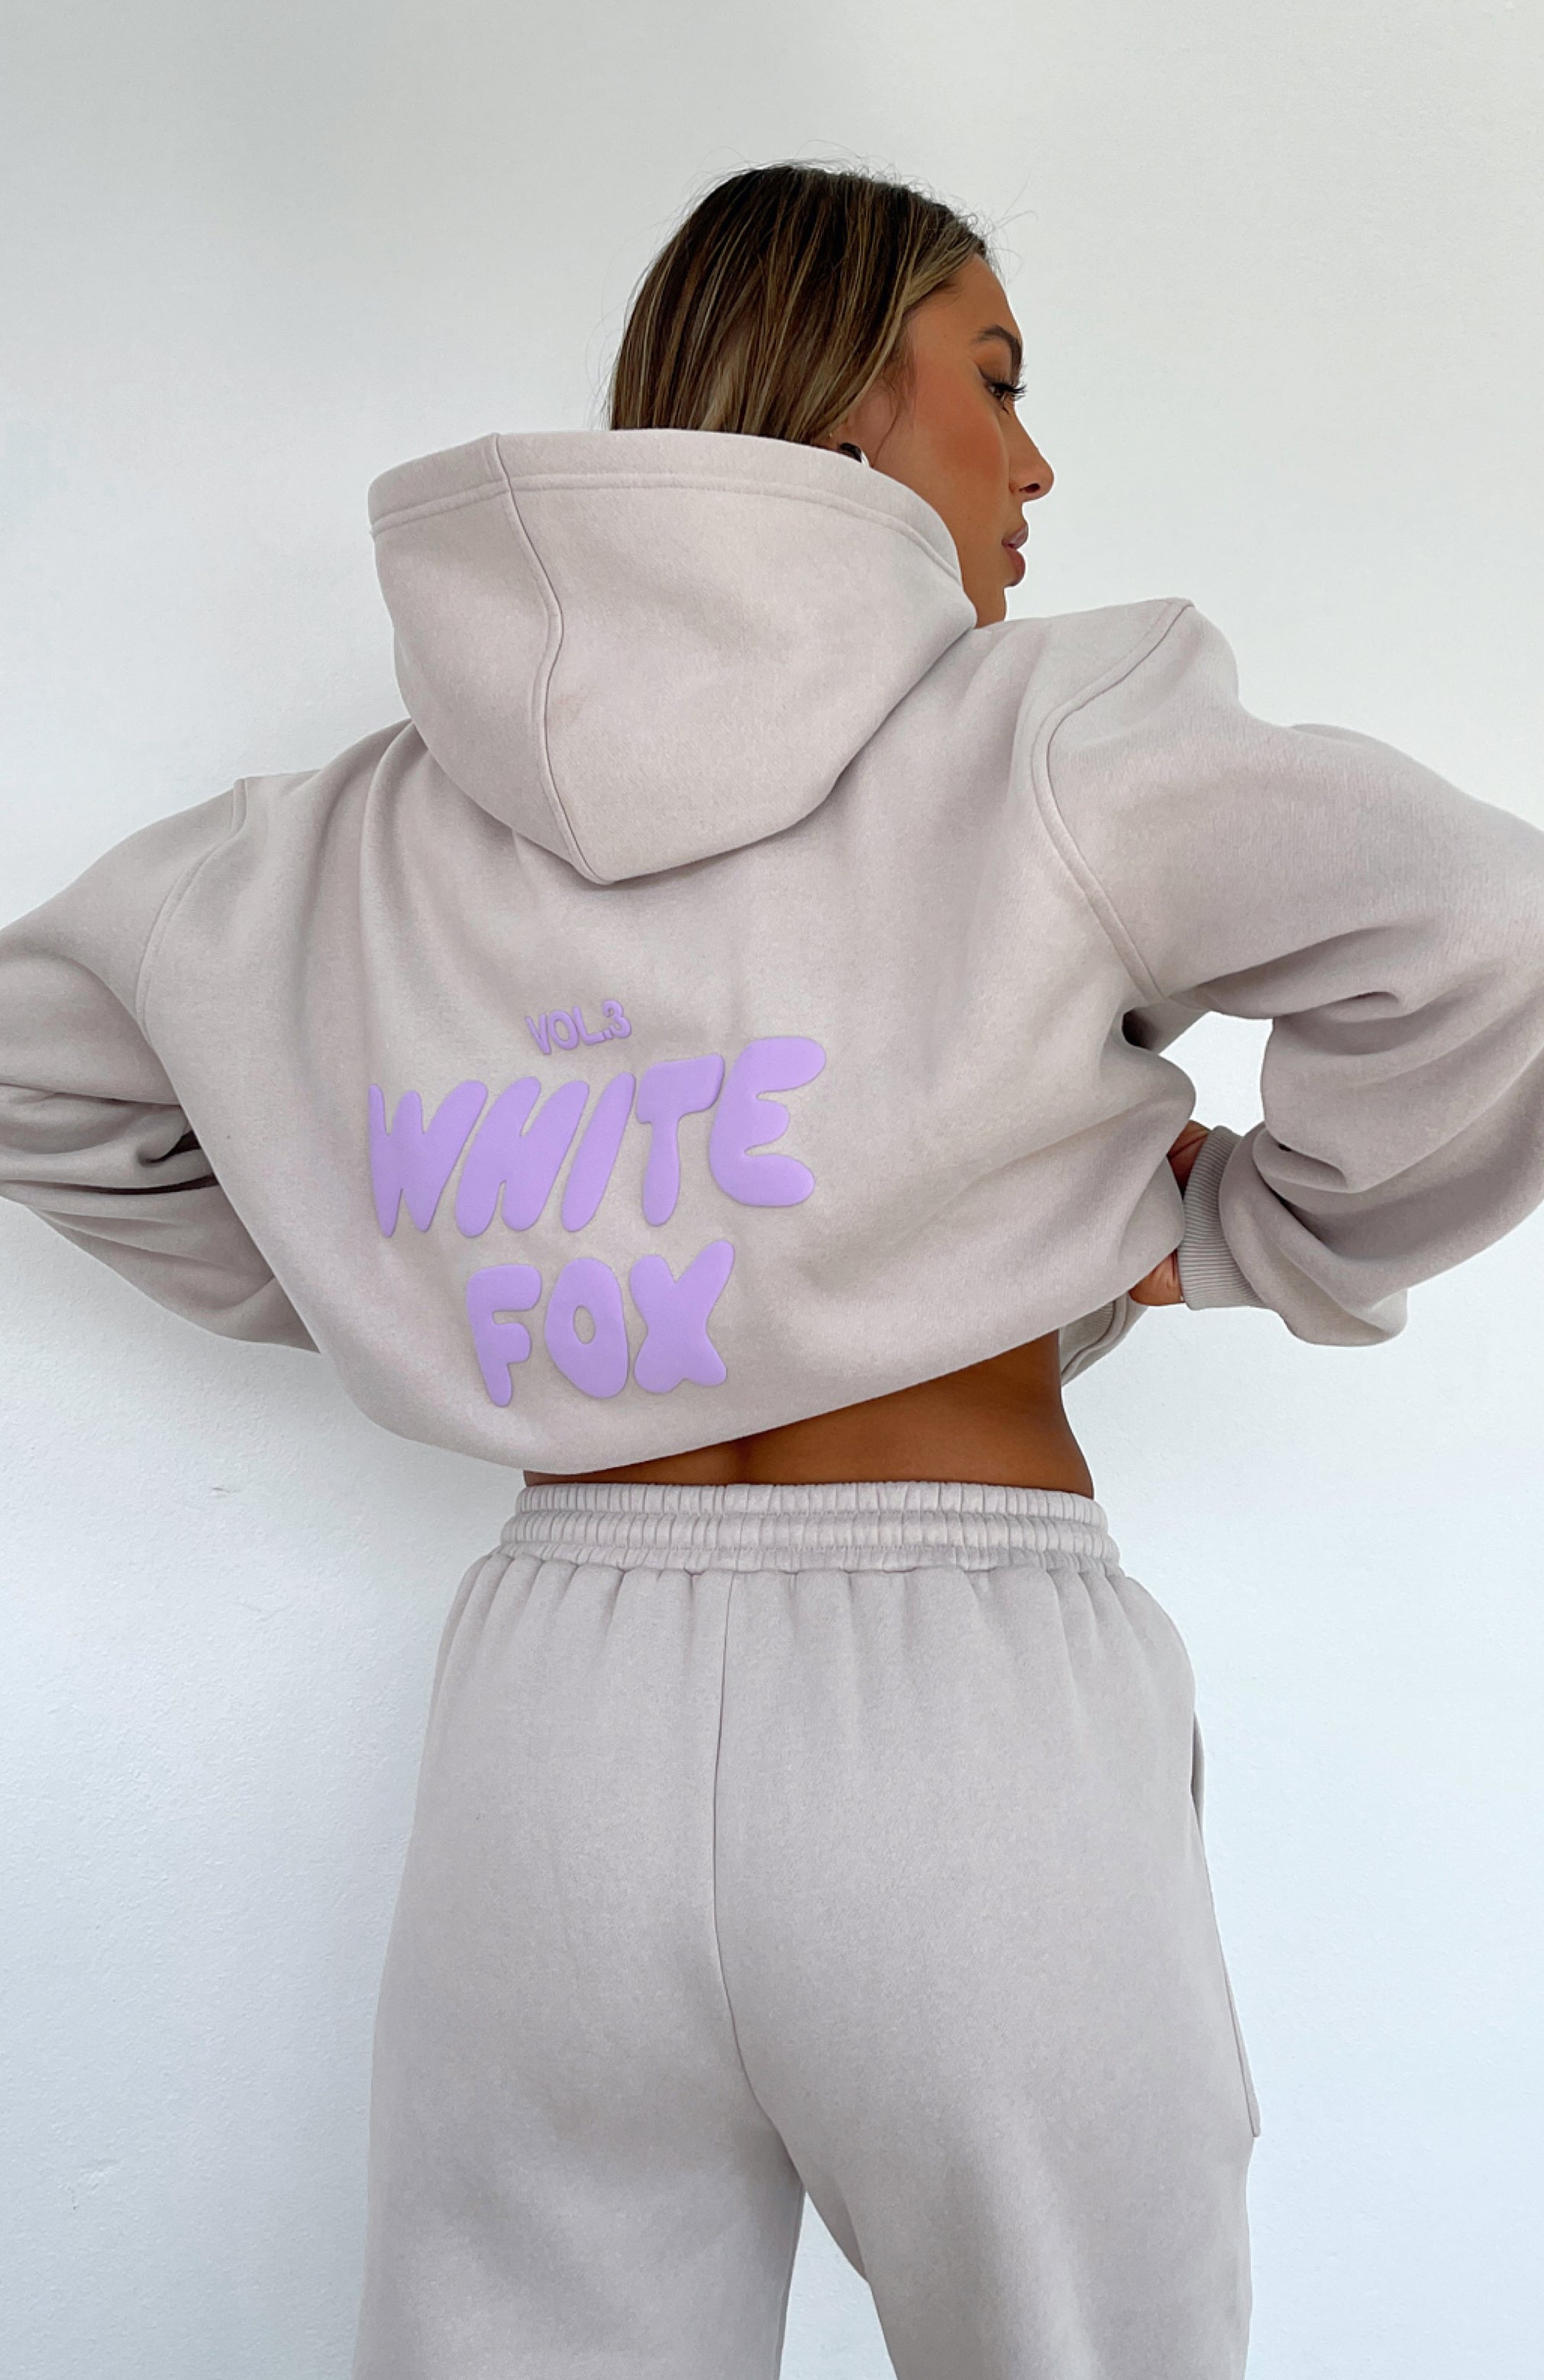 Offstage Hoodie Cloud | White Fox Boutique